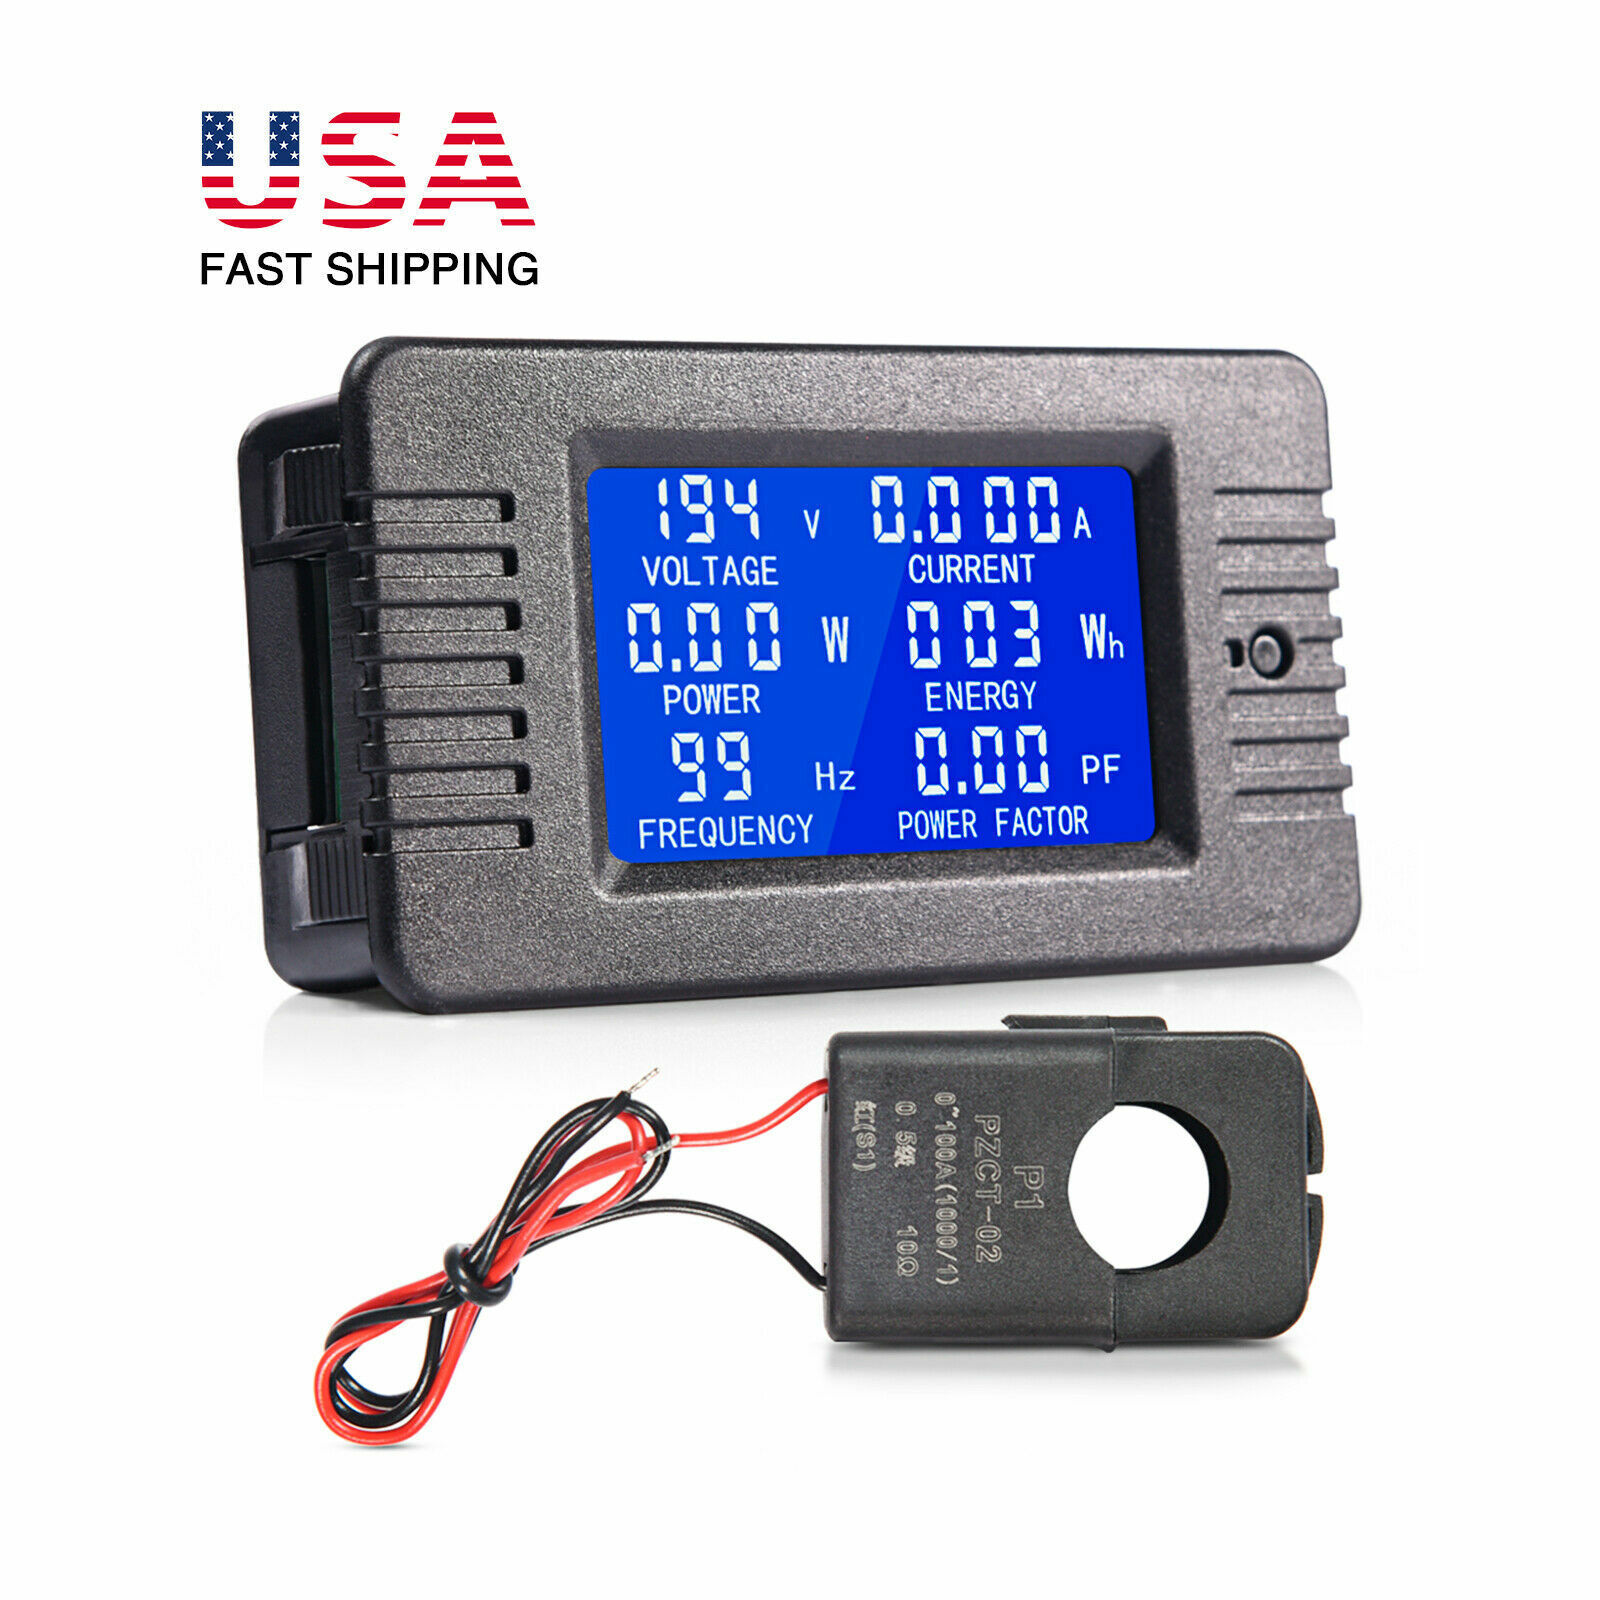 80-260V AC Voltmeter 100A LCD Display Current Meter Power Battery Monitor Panel